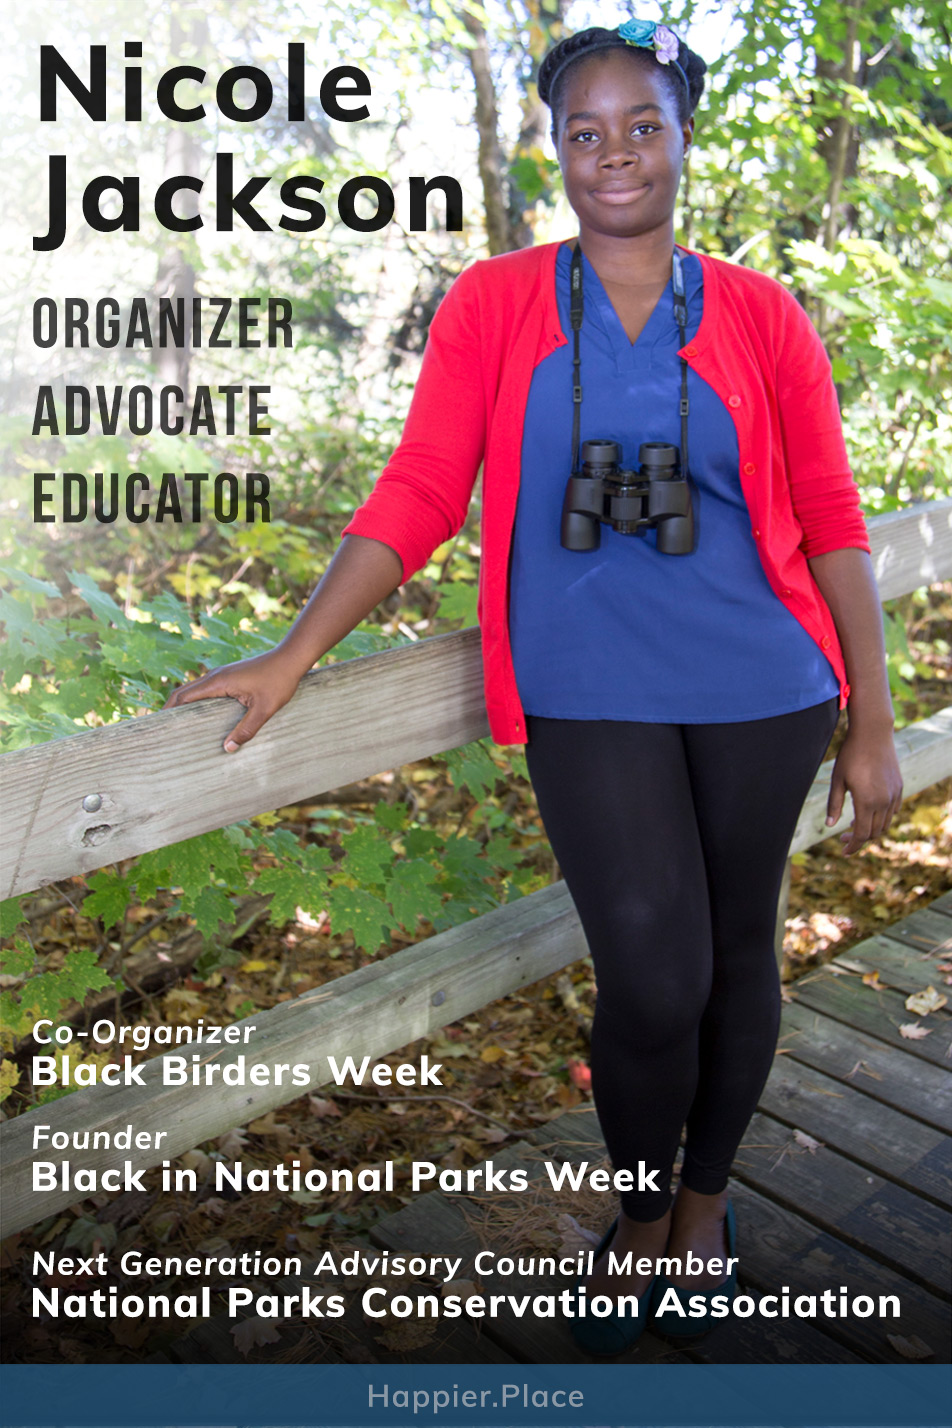 Founder of Black in National Parks Week, co-organizer of Black Birders Week, National Parks Conservation Association advisory council member Nicole Jackson